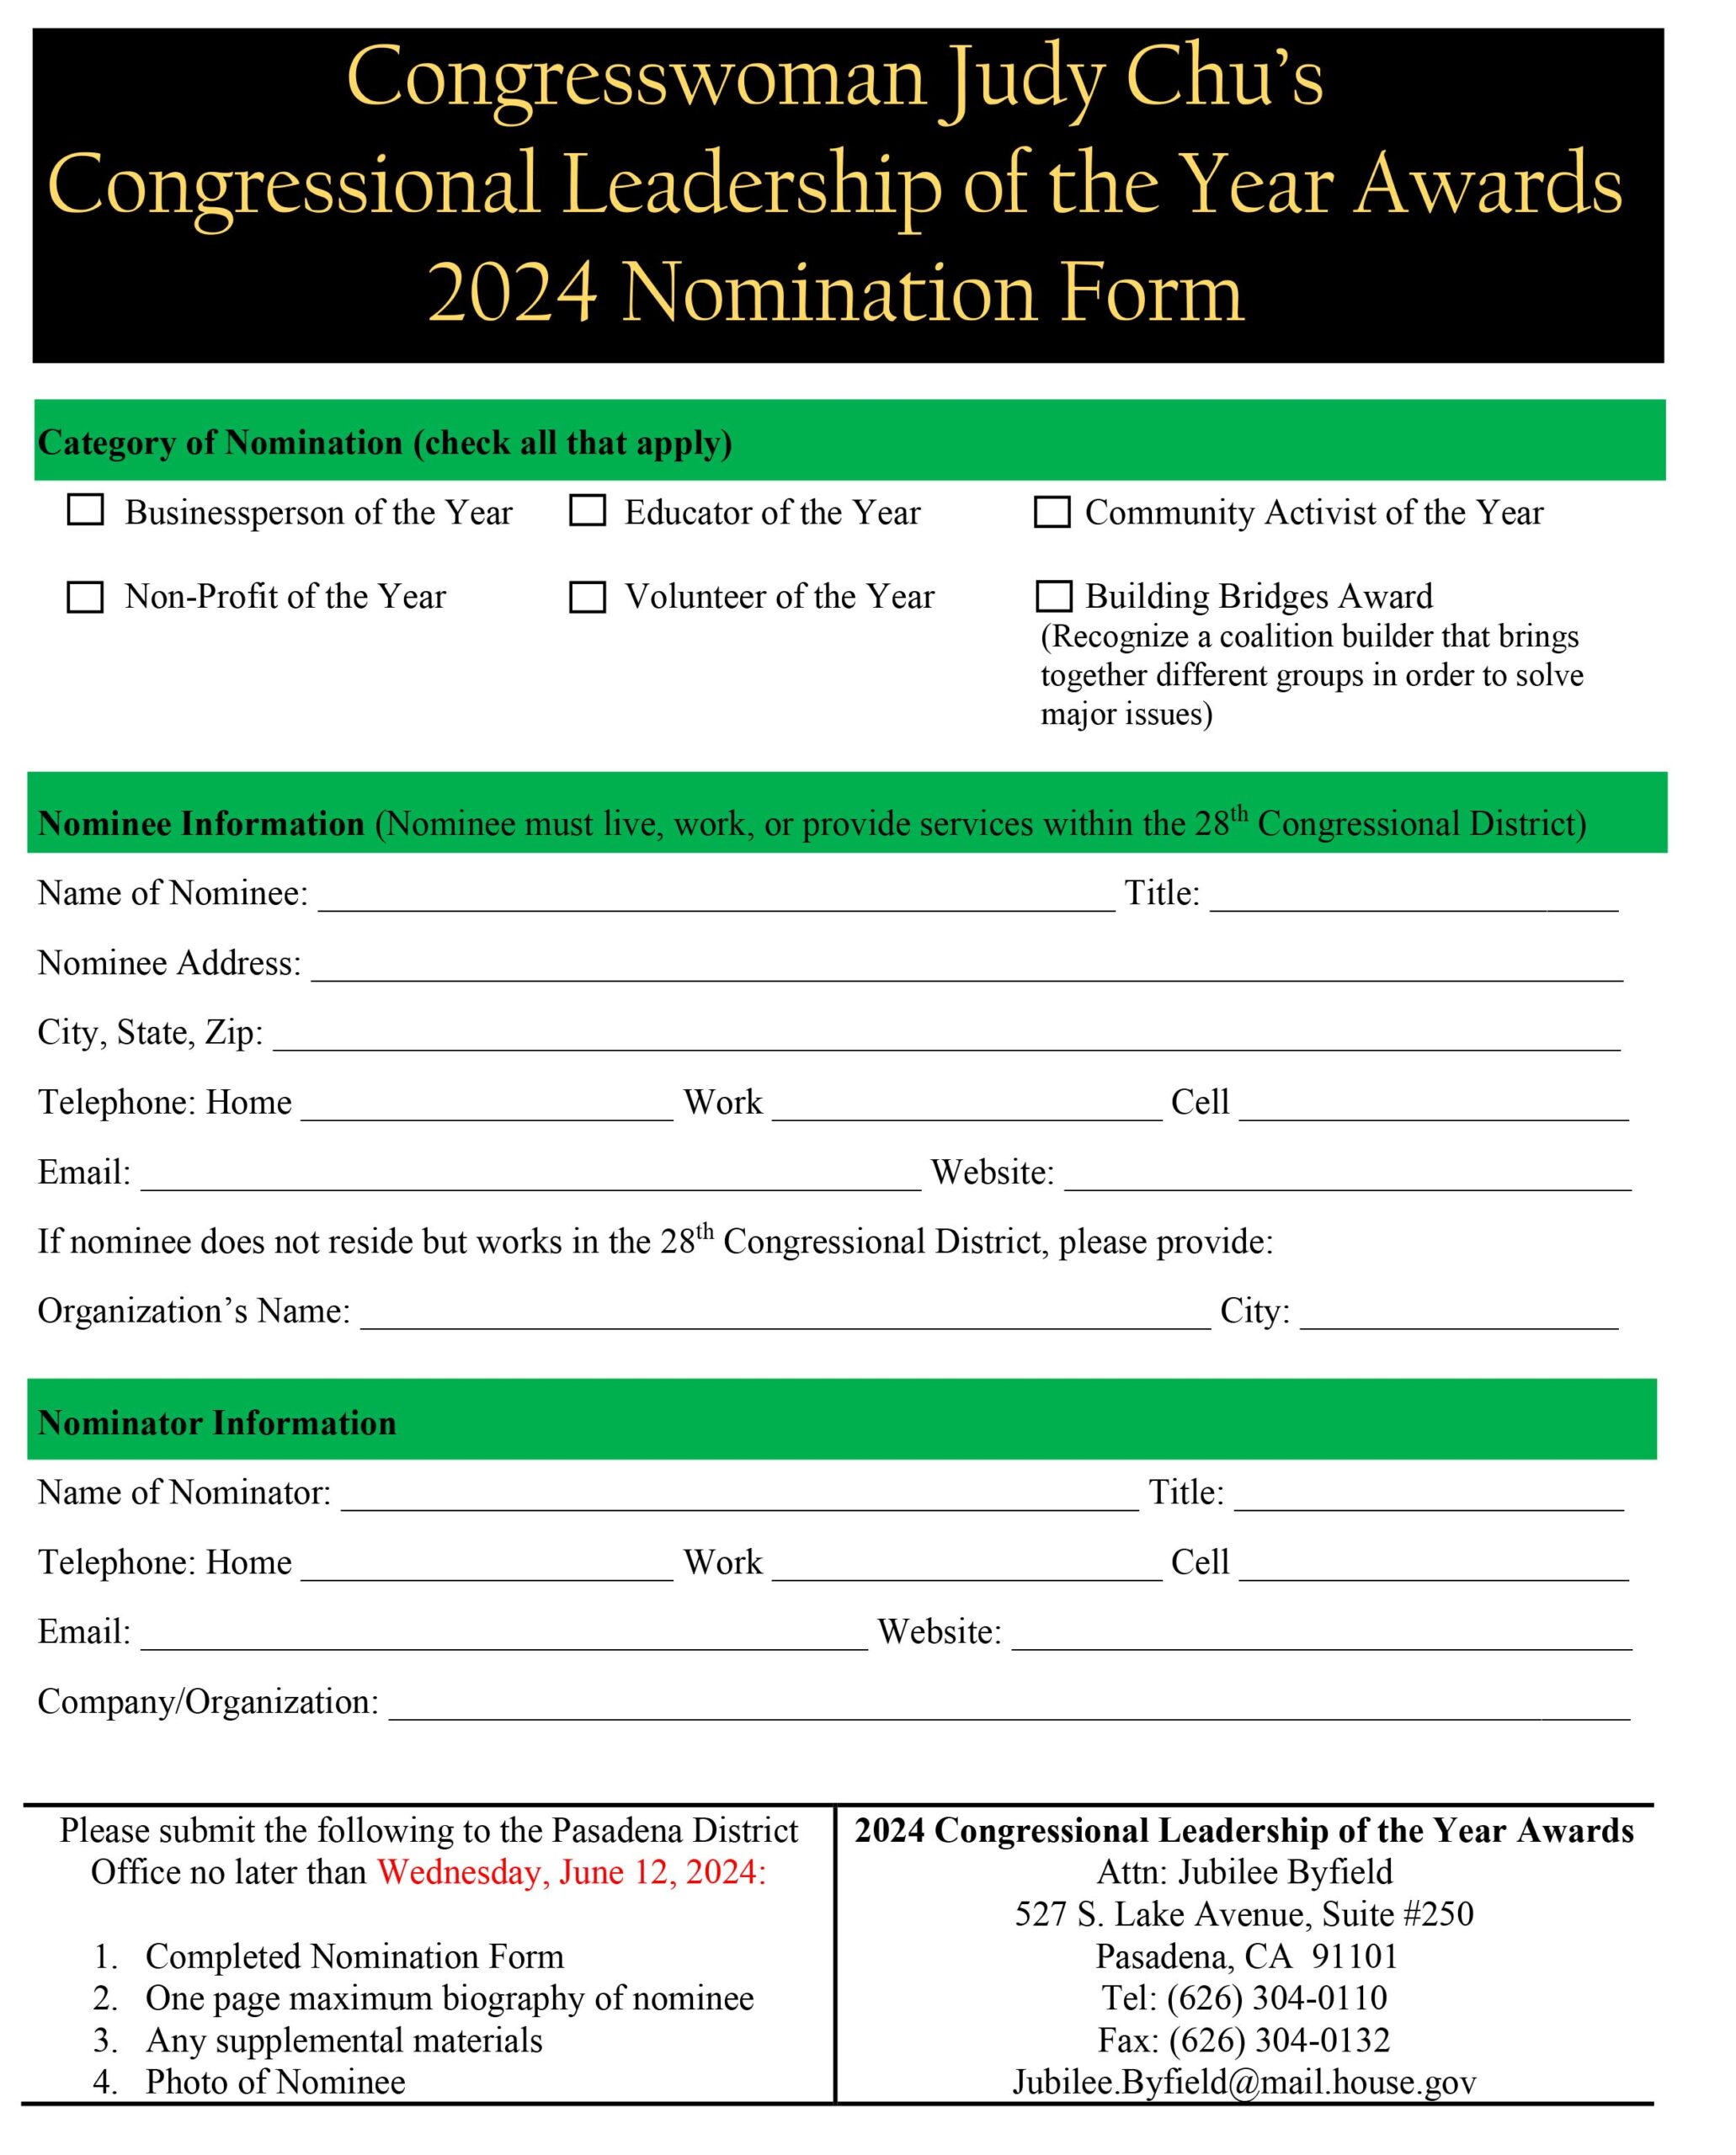 Annual Congressional Leadership Awards Ceremony nomination form